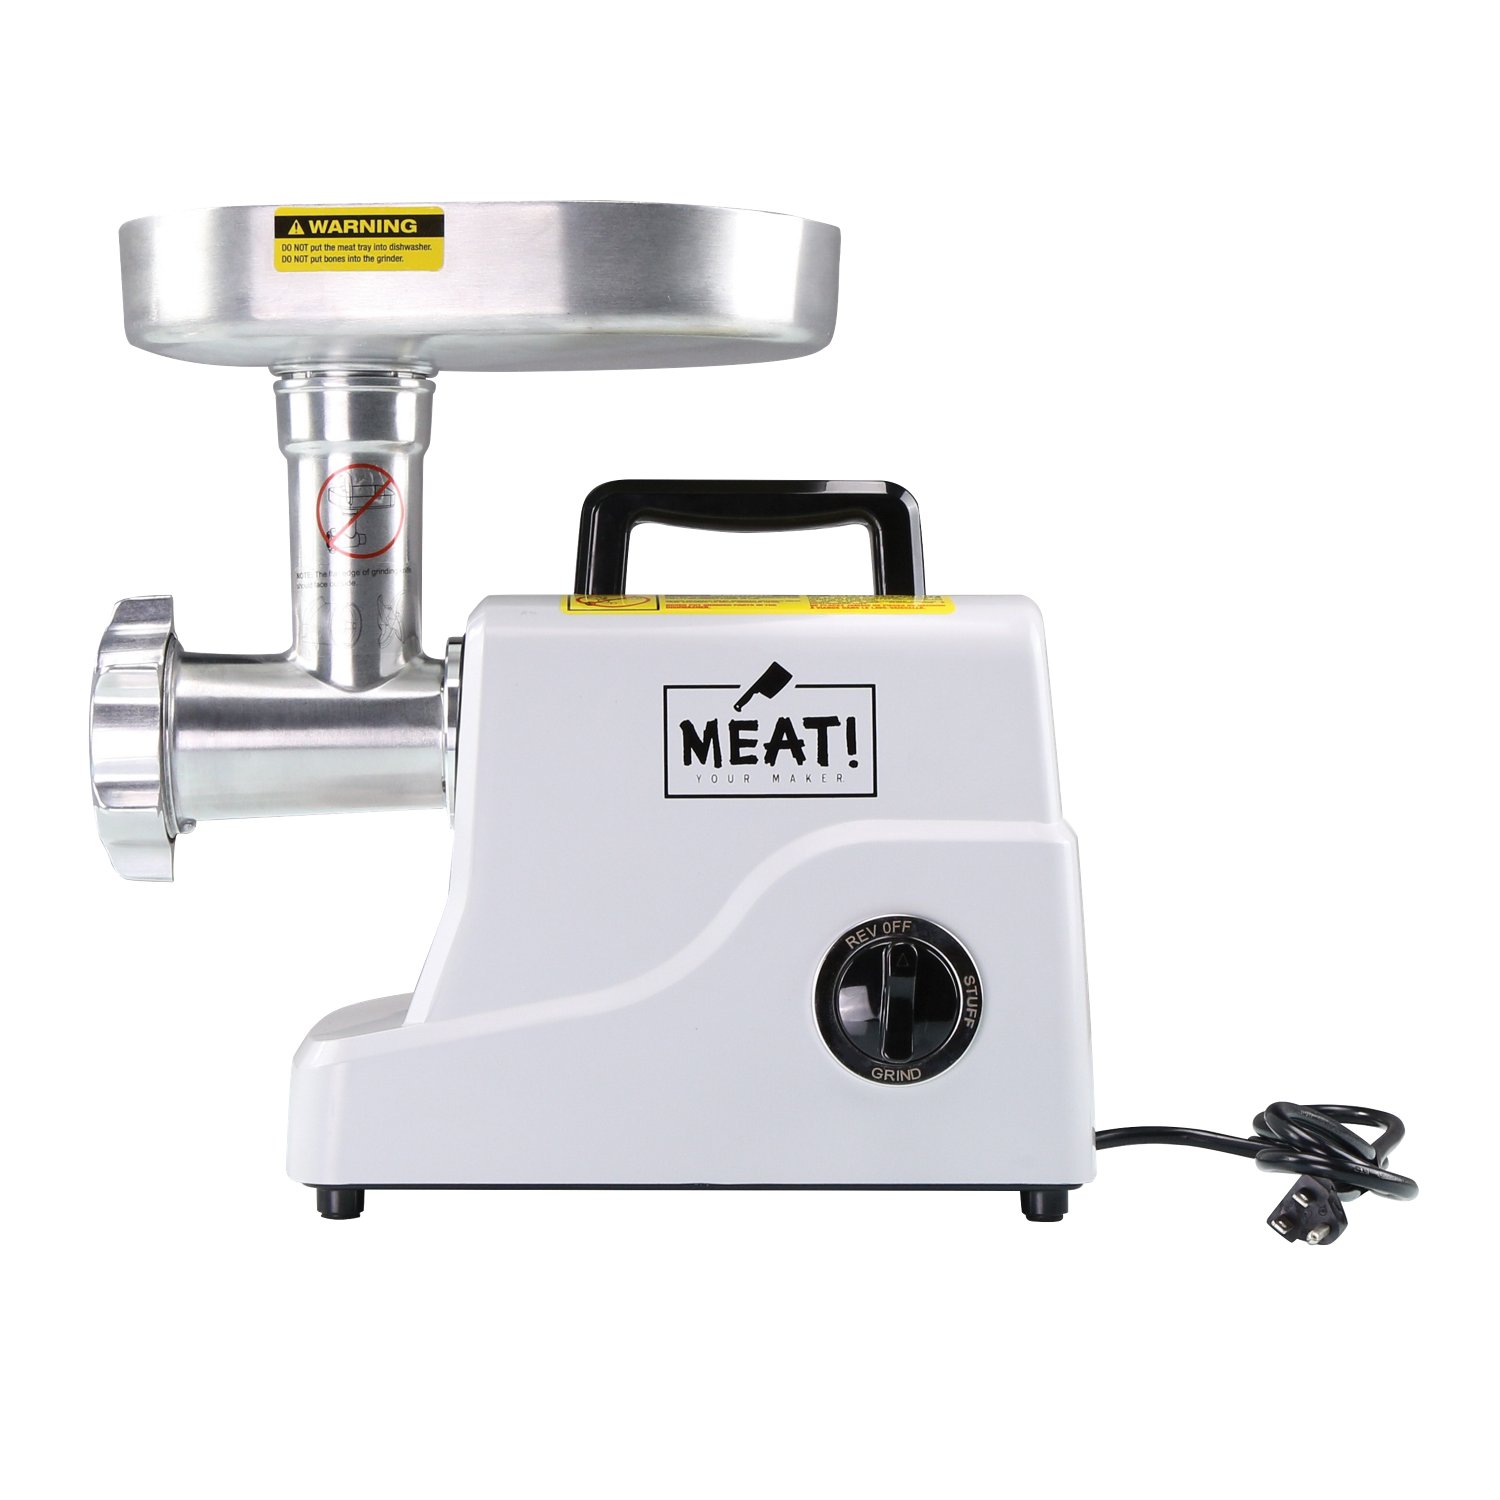 https://academy.scene7.com/is/image/academy//game---food-processing/meat-500-watt-12-grinder-1117072-/fc97734331f54818a57f1ede5902e79d?$pdp-gallery-ng$